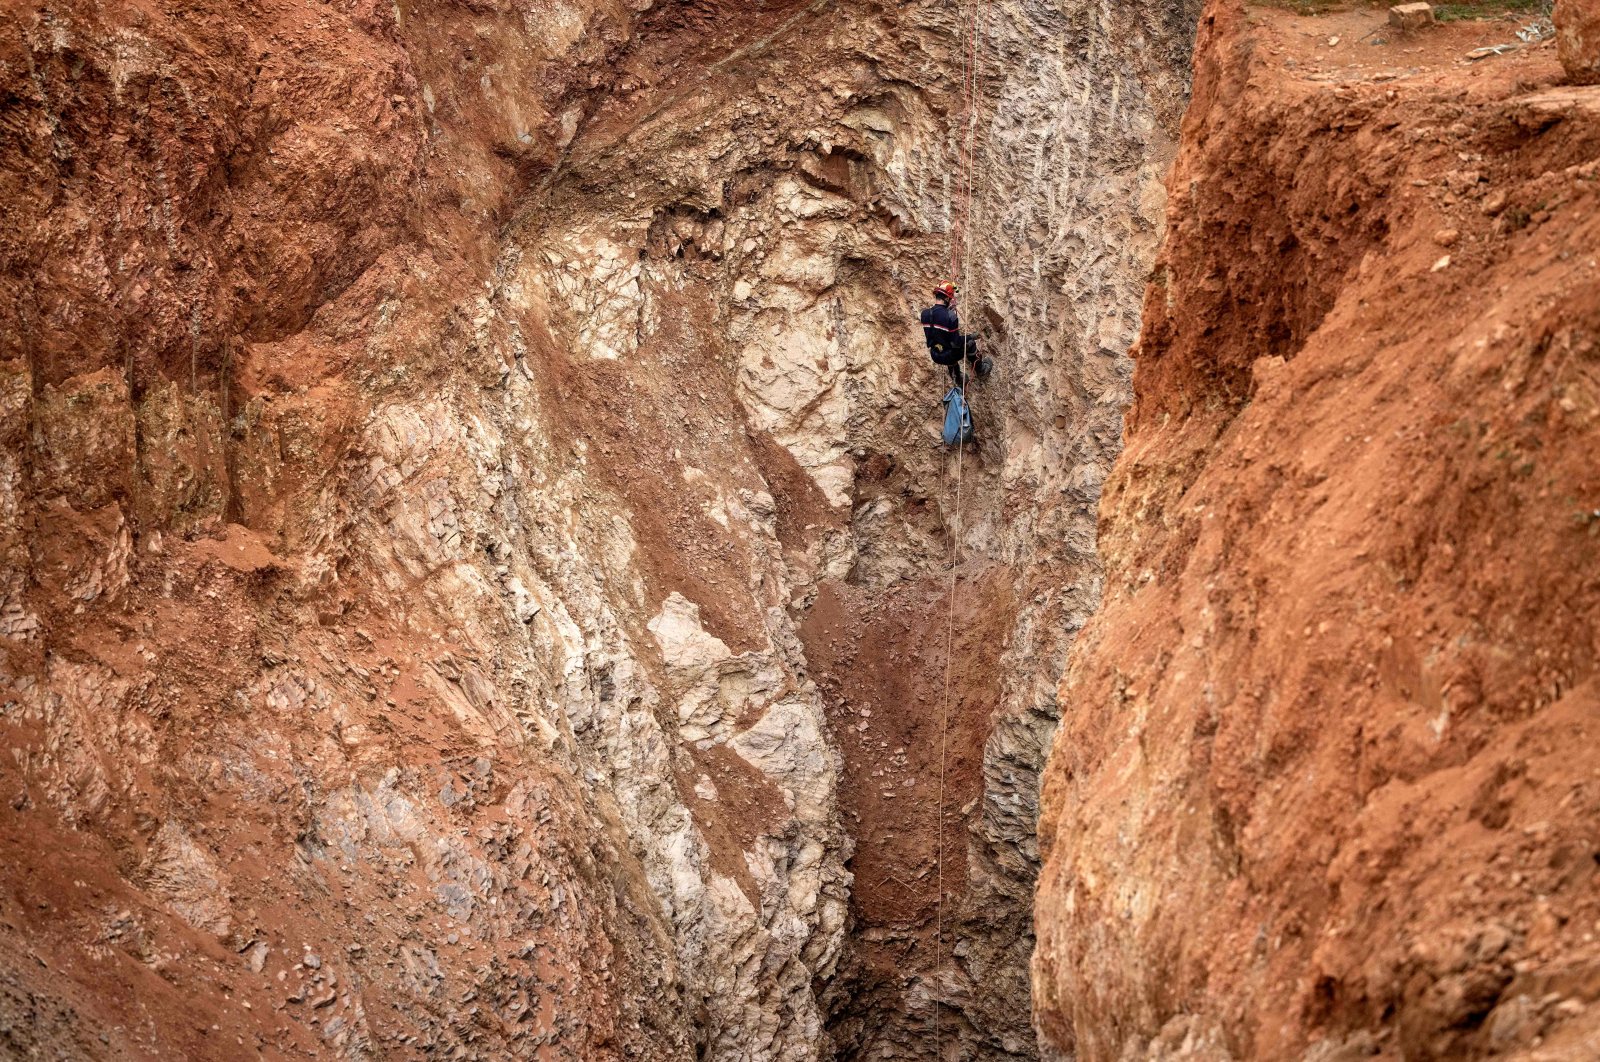 A Moroccan emergency services climber works to rescue a 5-year-old boy, Rayan, who fell into a well on Feb. 1, in the remote village of Ighrane in the rural northern province of Chefchaouen, Morocco, Feb. 4, 2022. (AFP Photo)